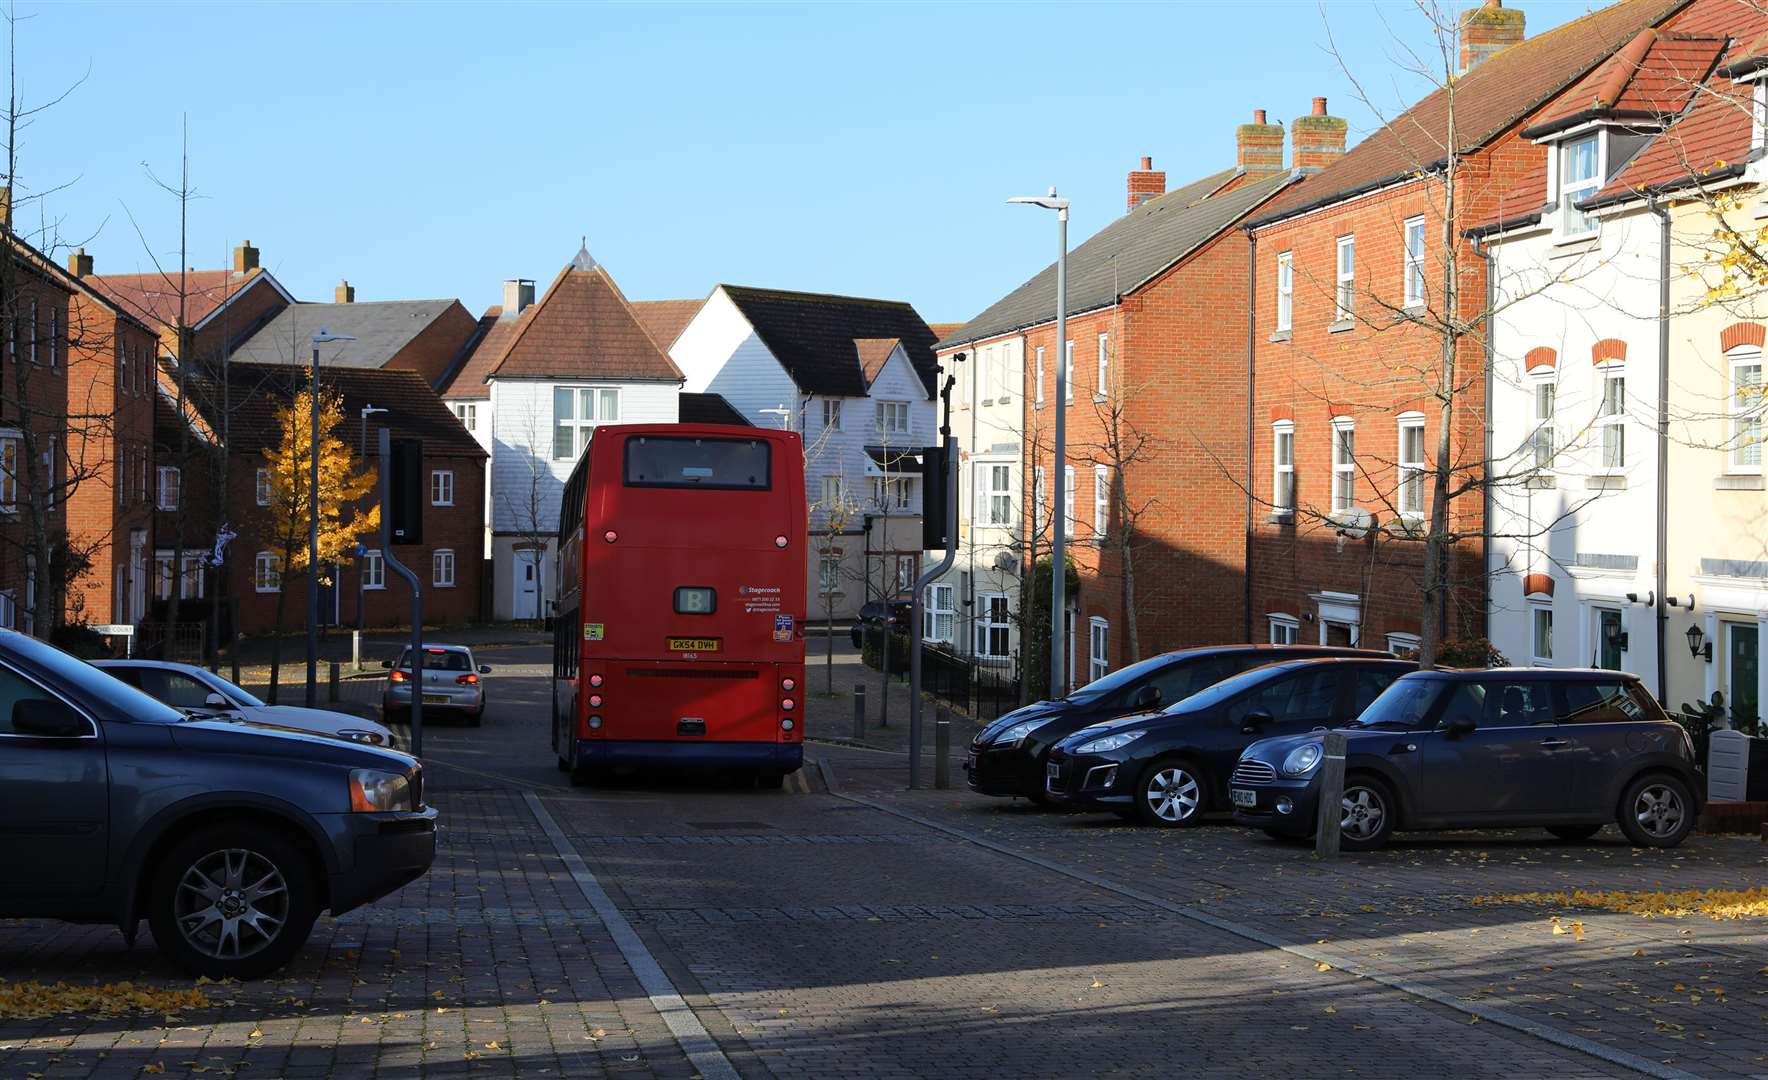 Stagecoach faced similar issues on the estate in 2019